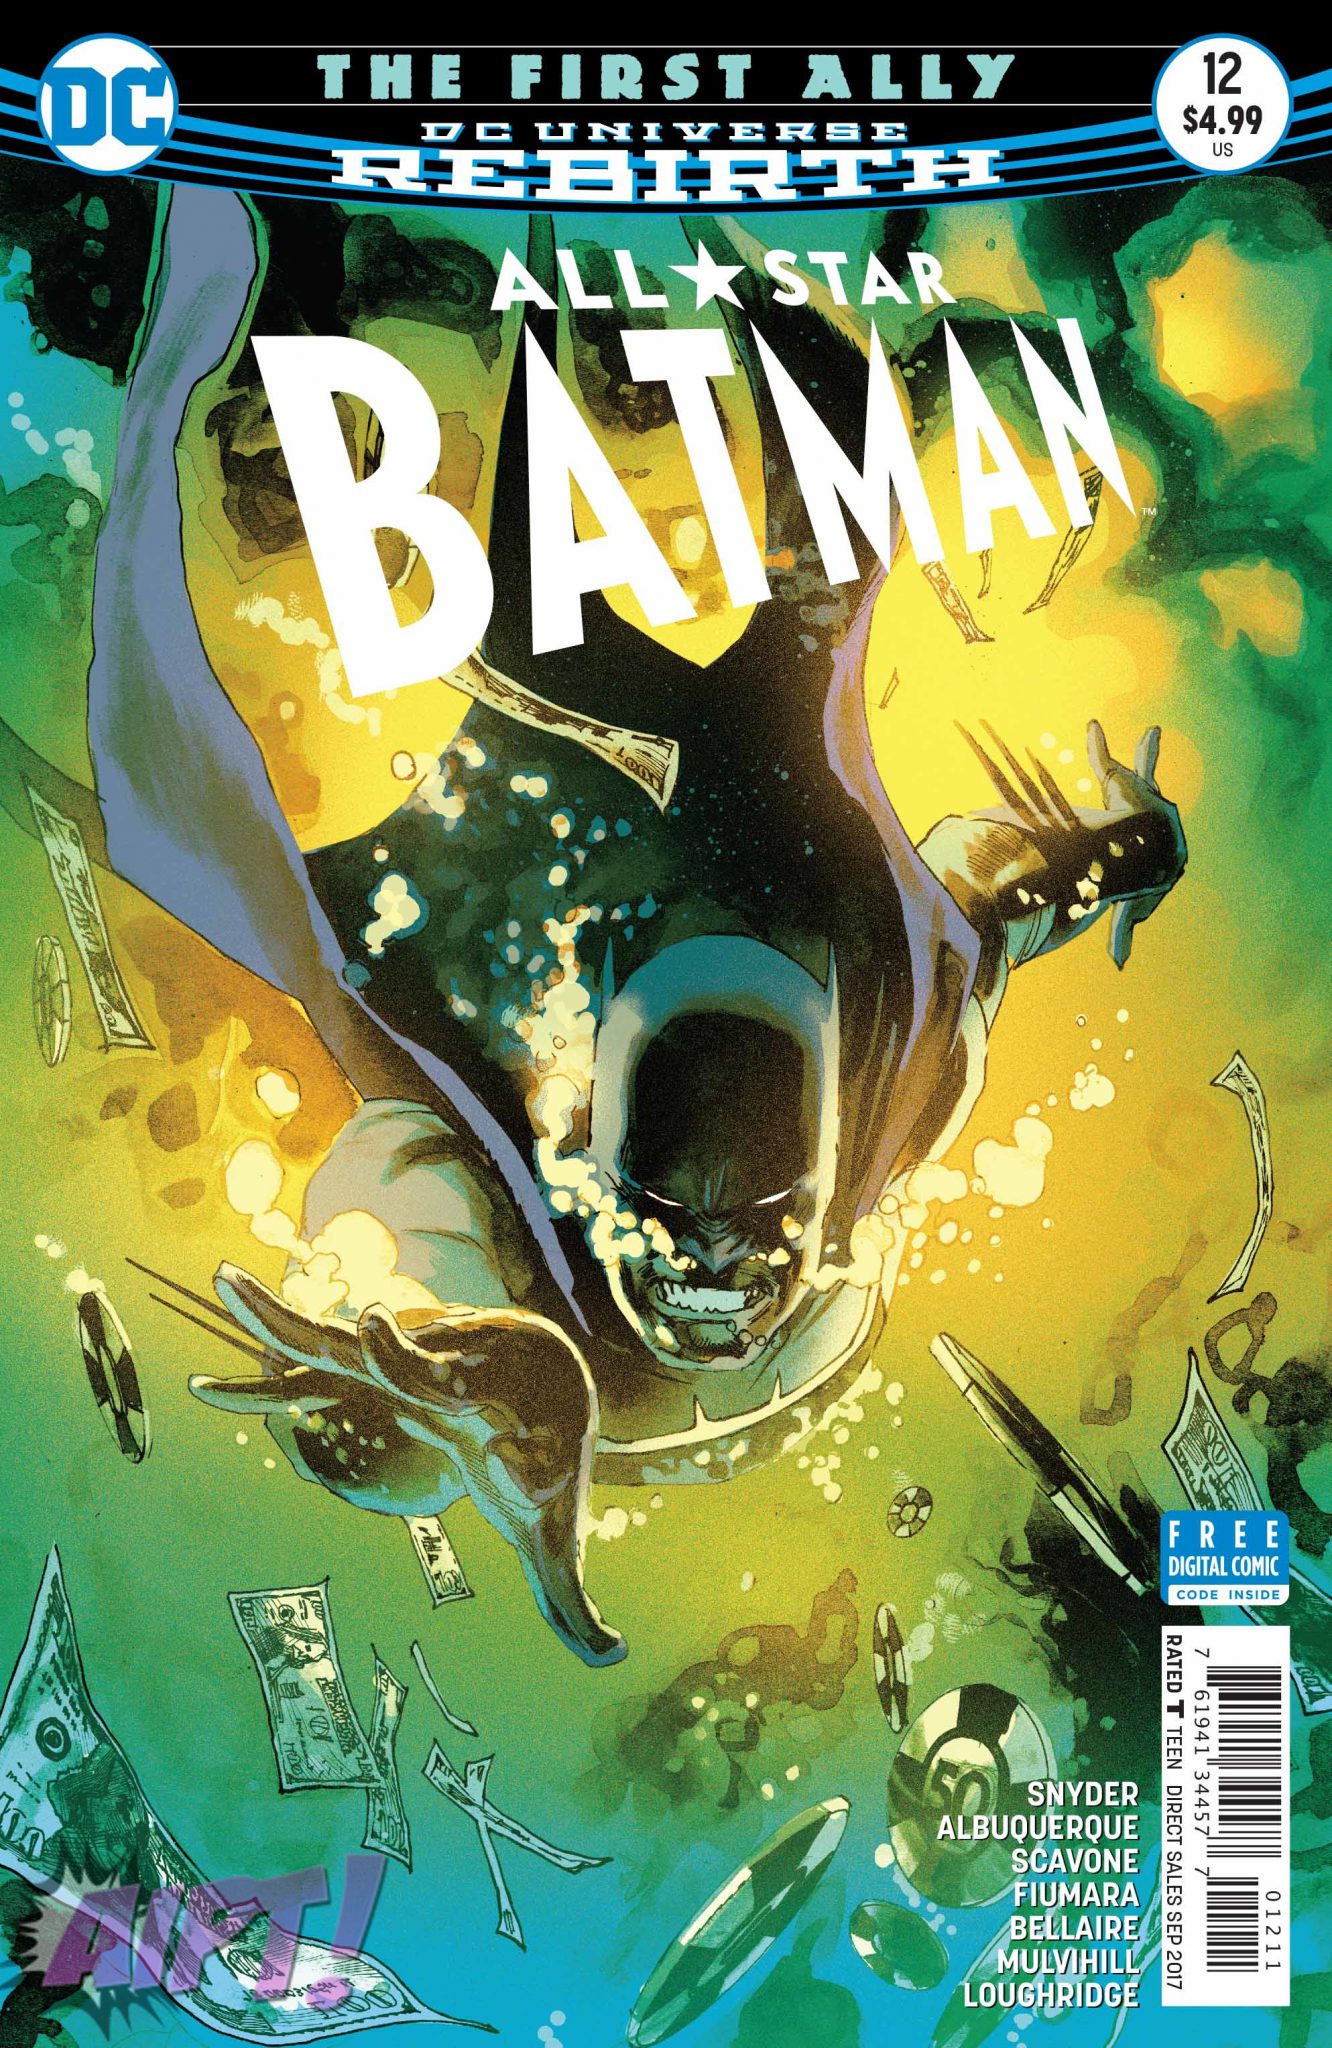 [EXCLUSIVE] DC Preview: All-Star Batman #12